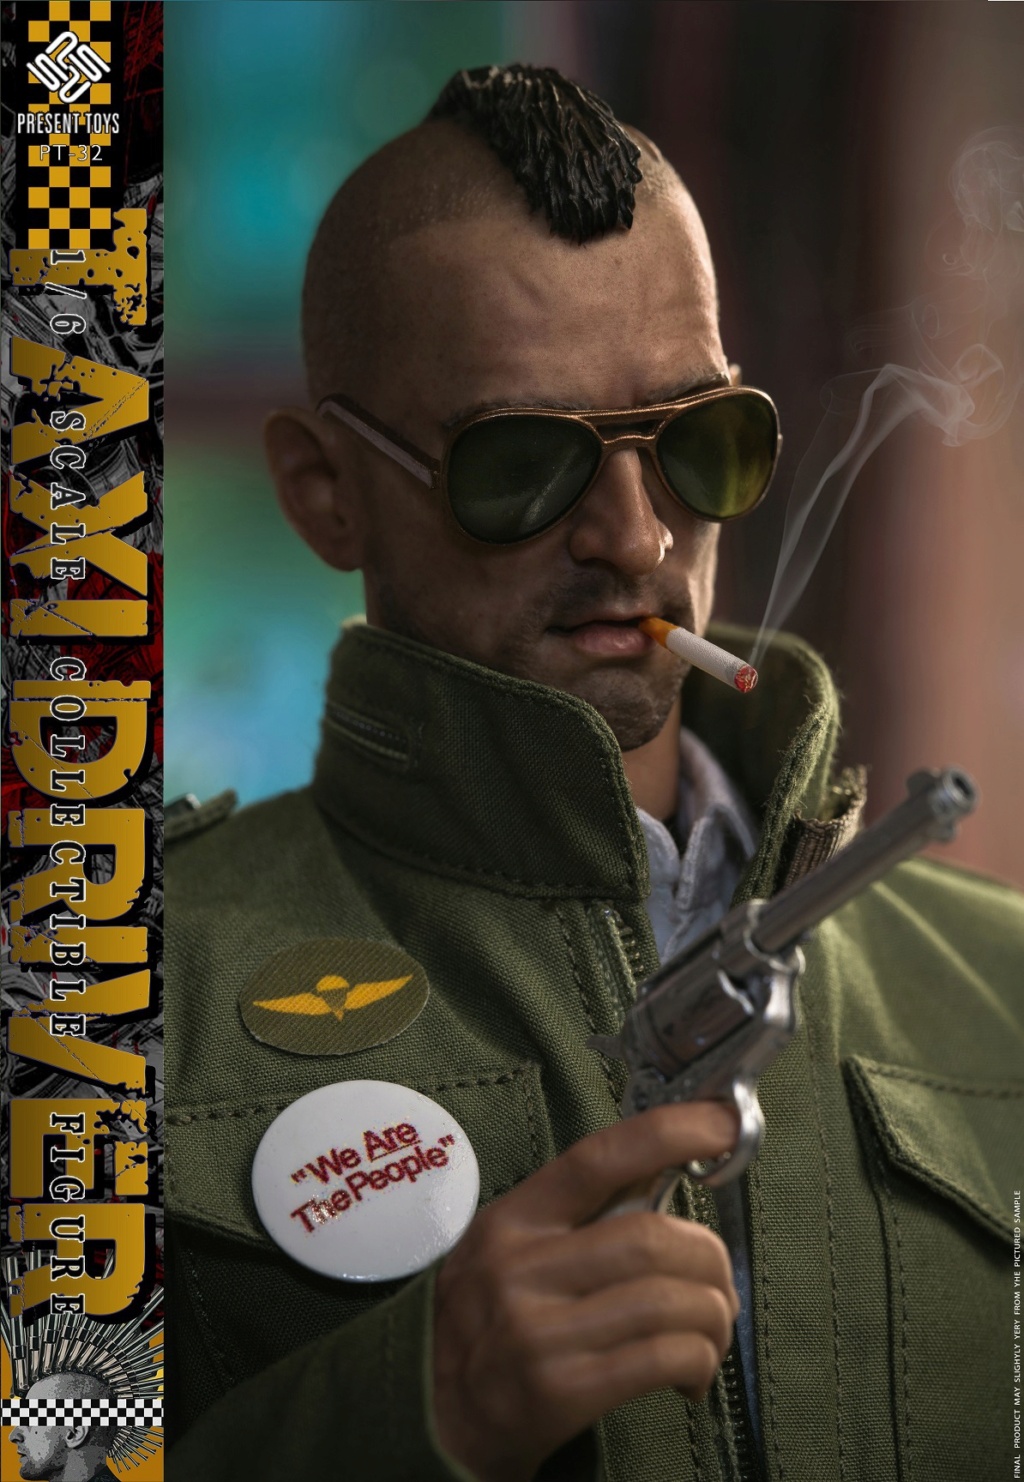 NEW PRODUCT: Present Toys: 1/6 "Taxi Driver" Collection Doll#PT-sp32 18193210